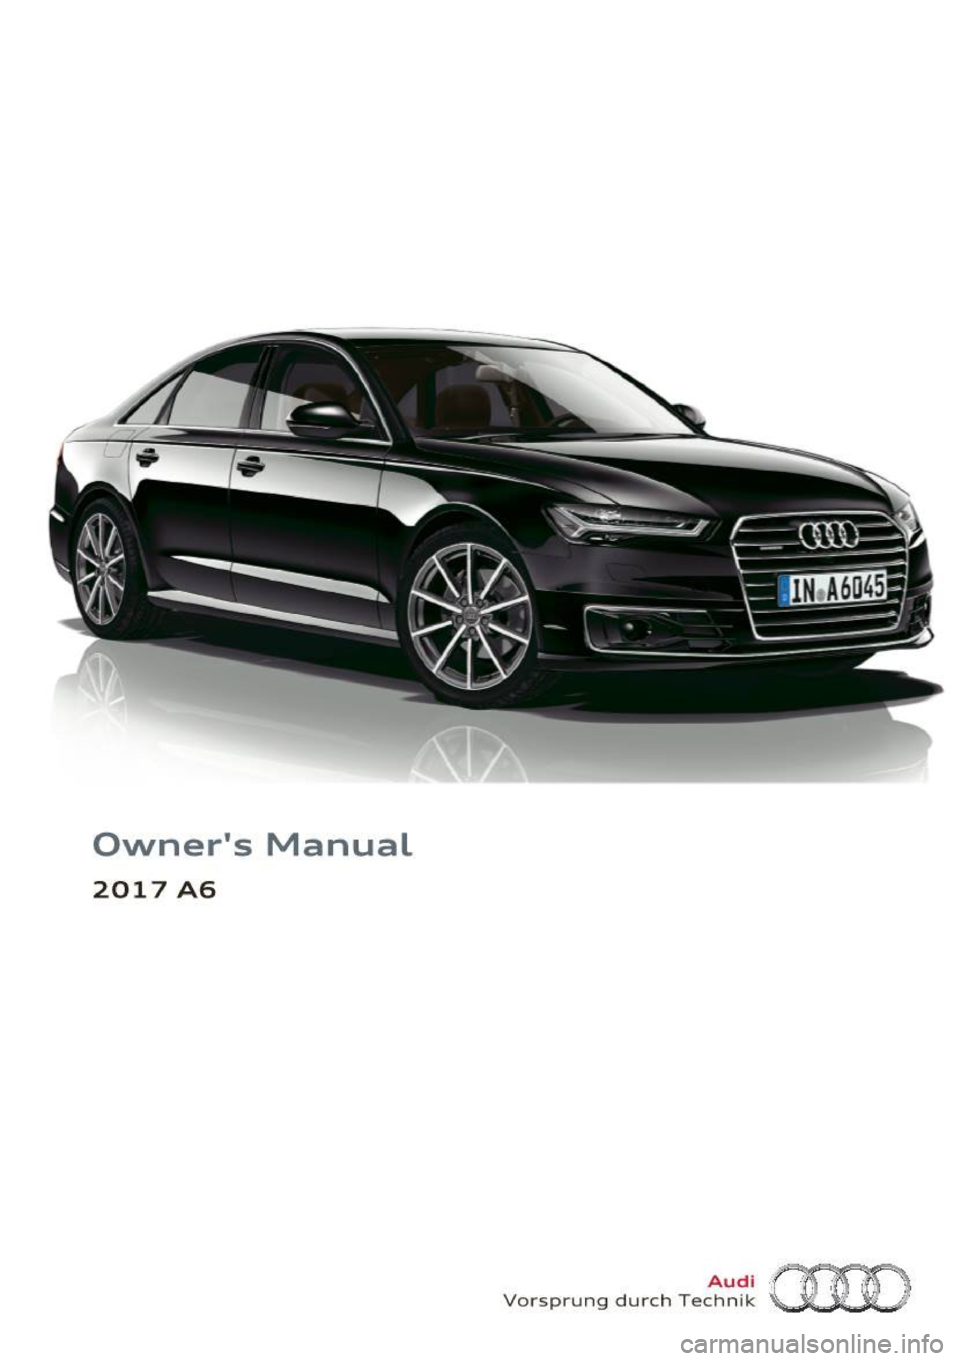 AUDI A6 2017  Owners Manual owners Manual 
2017 A6  